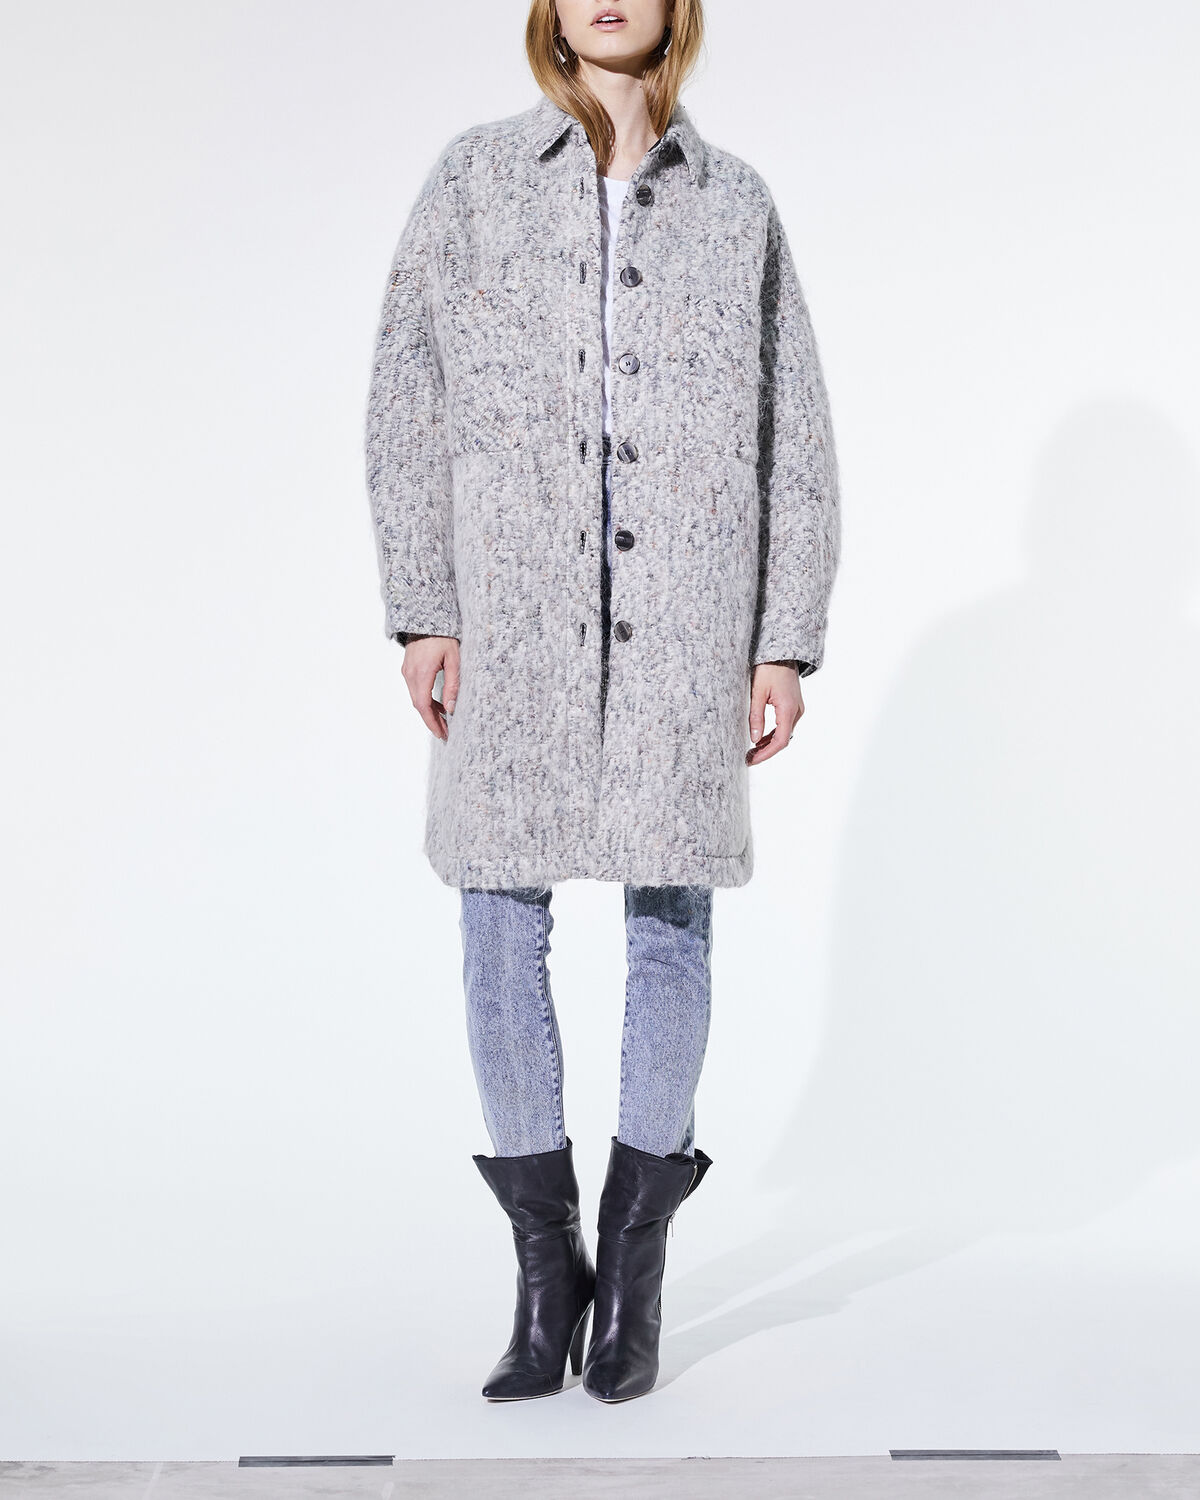 Photo of IRO Paris Abdona Coat Grey - With Its Hidden Colourful Shades, This Coat Will Bring A Resolutely Modern Touch To Any Outfit. Made From Wool, Mohair And Alpaca For A Warm Wear, It Is An Essential Of The Season. Wear It With Jeans For A Boyish Modern, Casual Look. Fall Winter 19